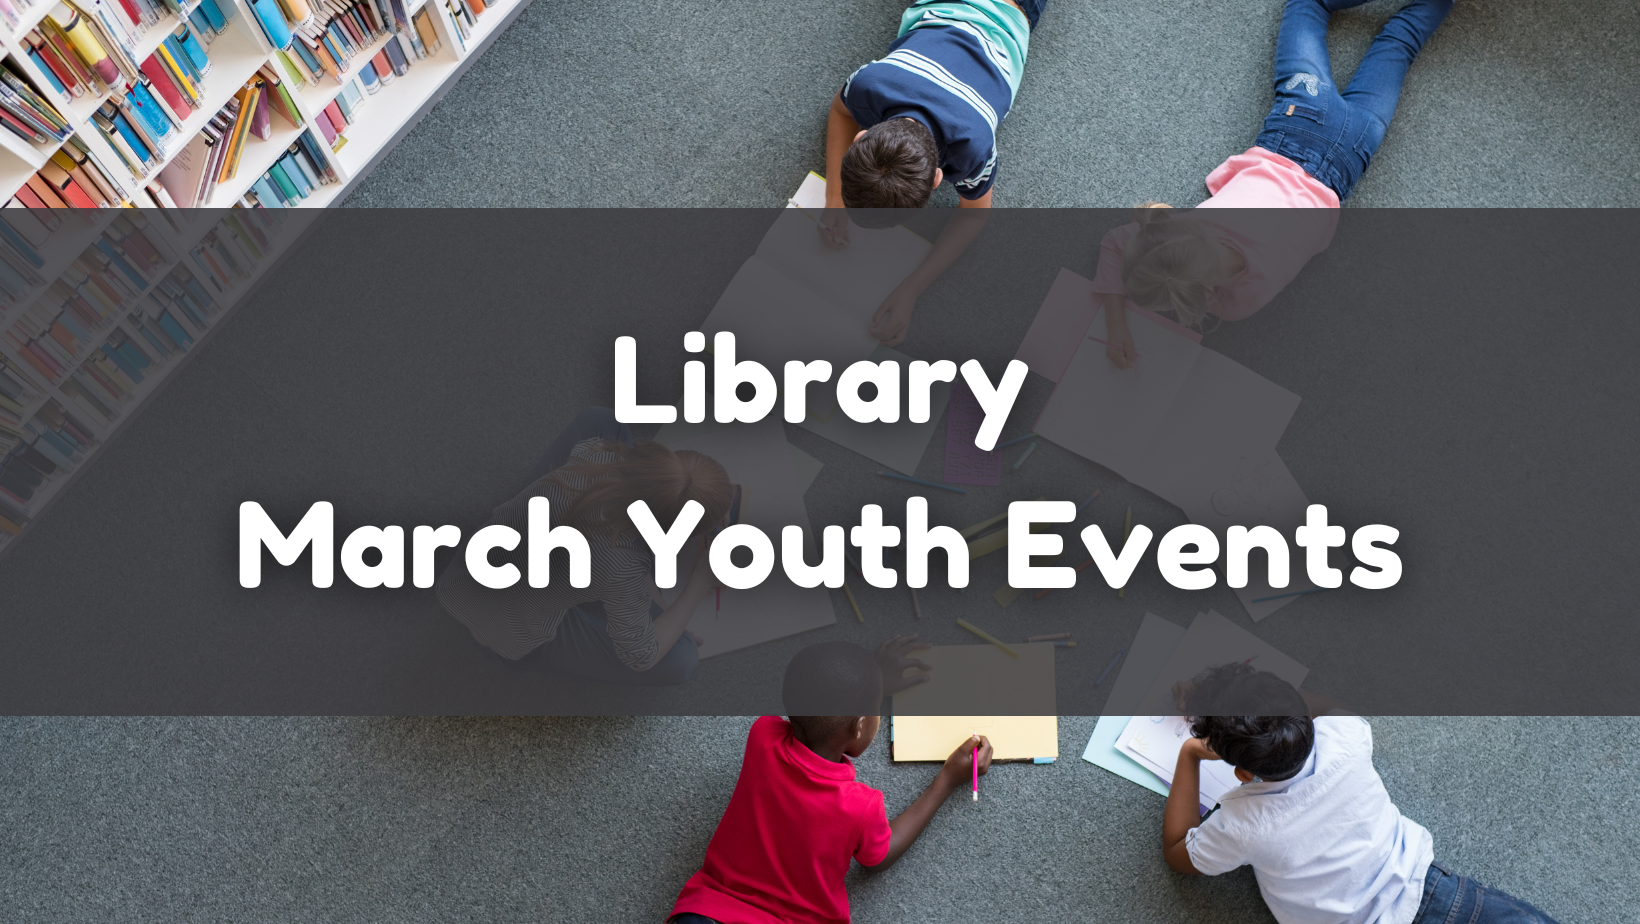 March Youth Programs at the Library